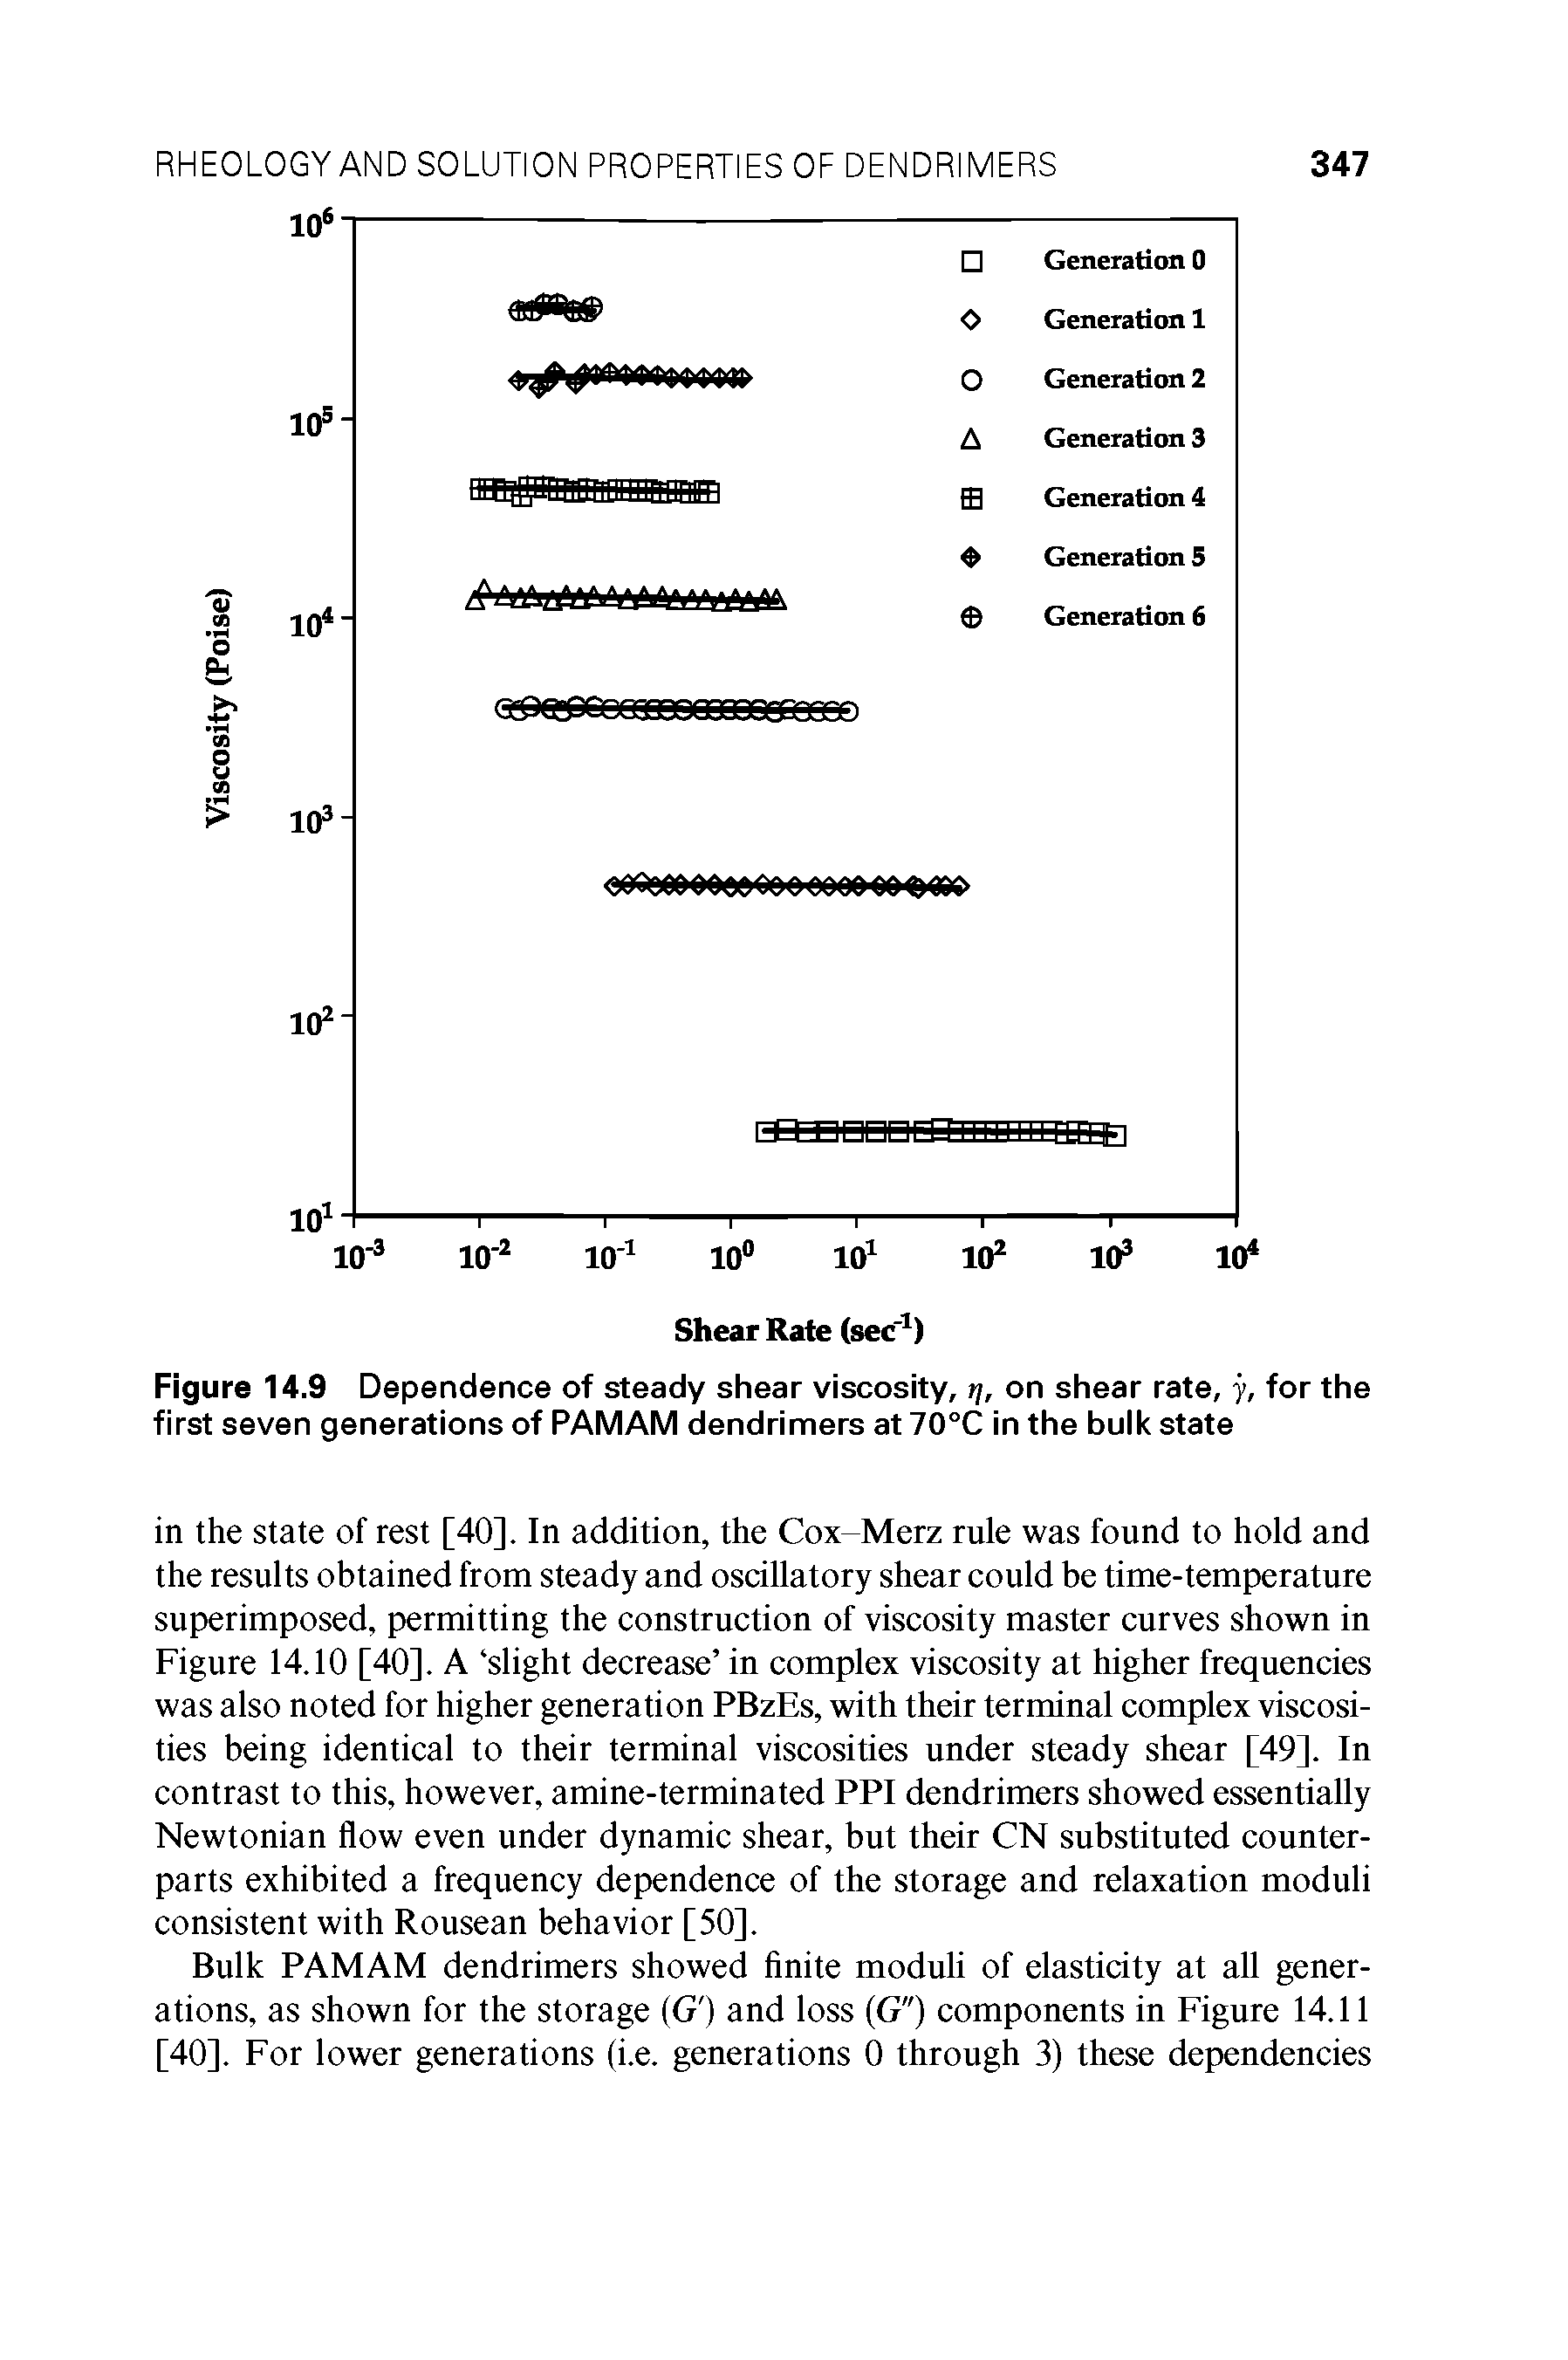 Figure 14.9 Dependence of steady shear viscosity, rj, on shear rate, y, for the first seven generations of PAMAM dendrimers at 70°C in the bulk state...